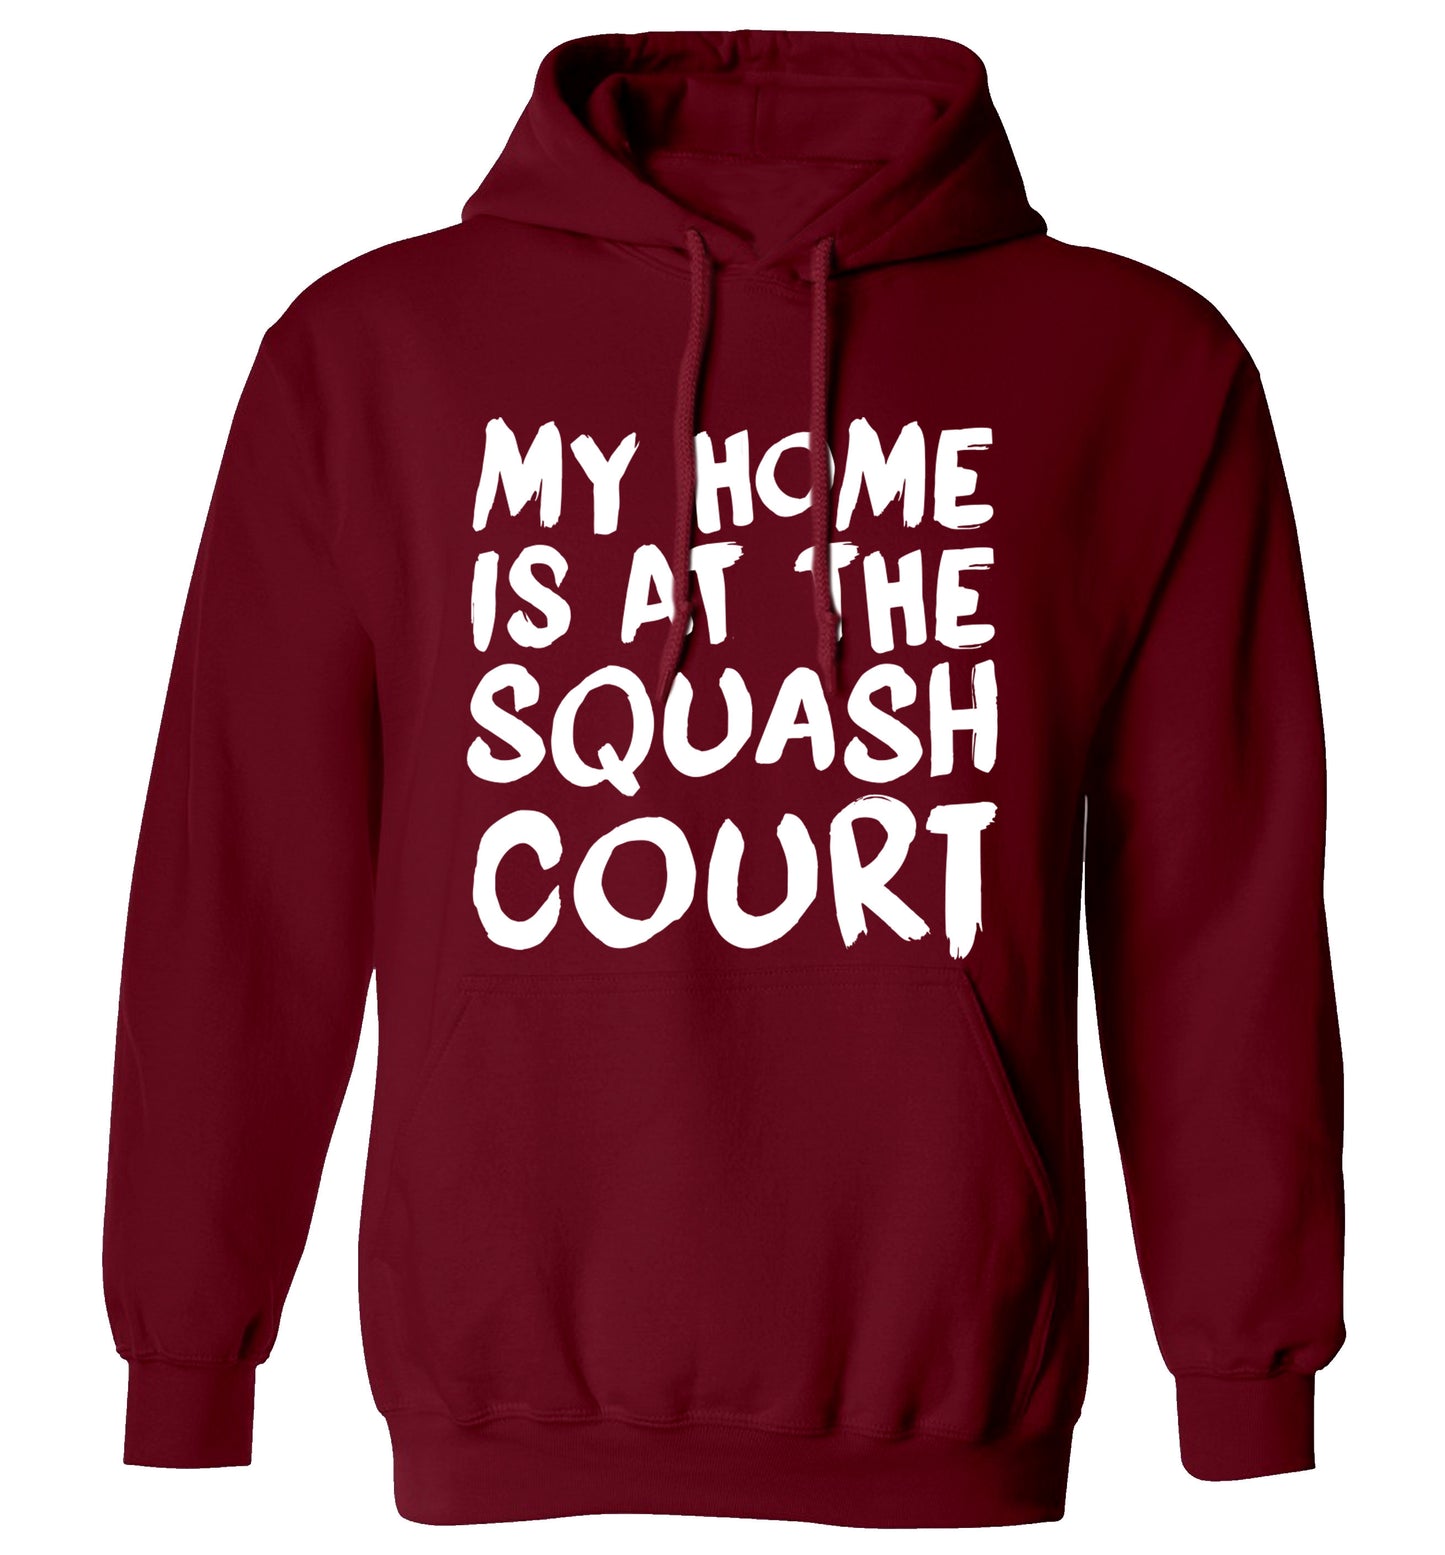 My home is at the squash court adults unisex maroon hoodie 2XL